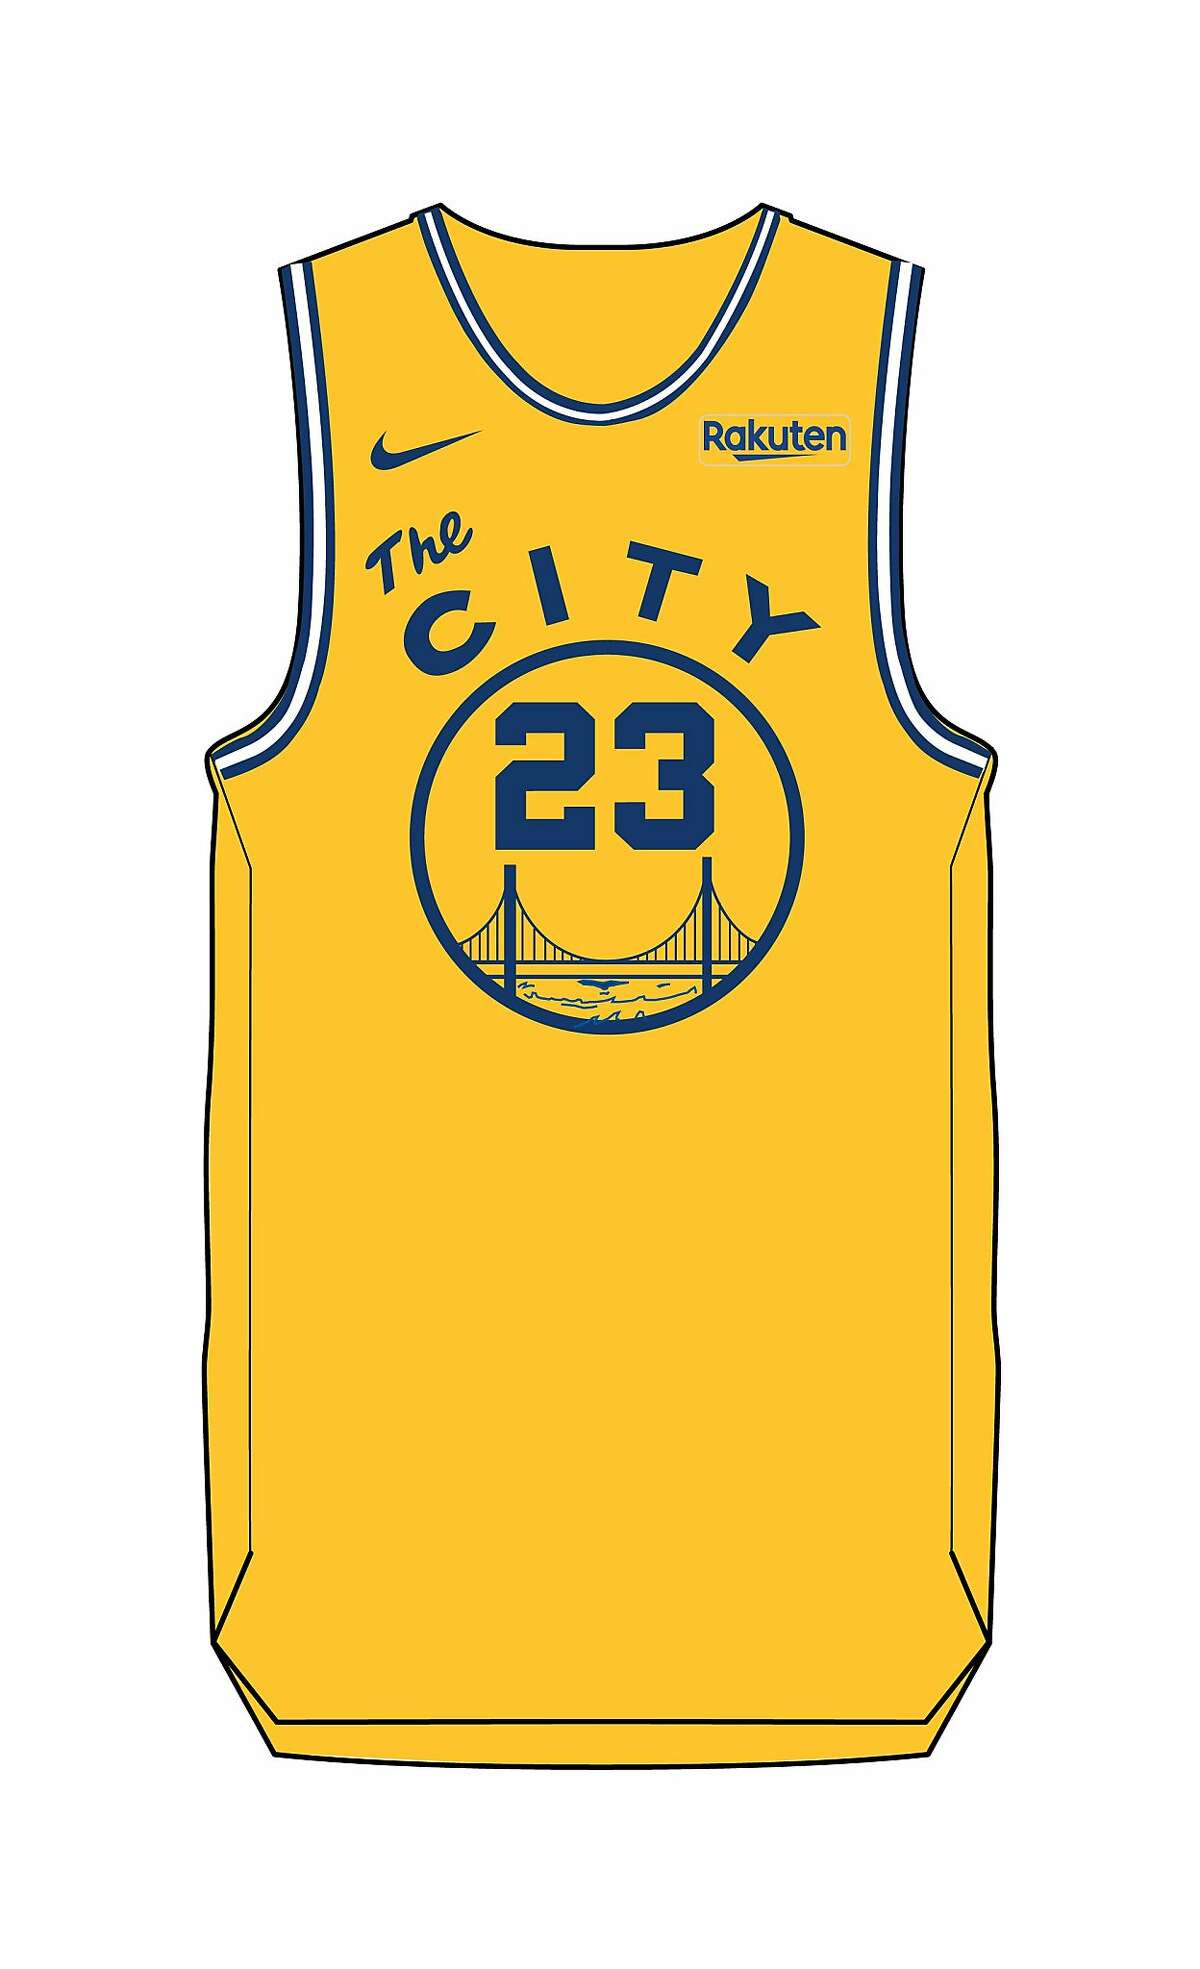 Adding some San Francisco Warriors vibes to this 'Statement Edition' jersey  concept I made. What do you think? : r/warriors